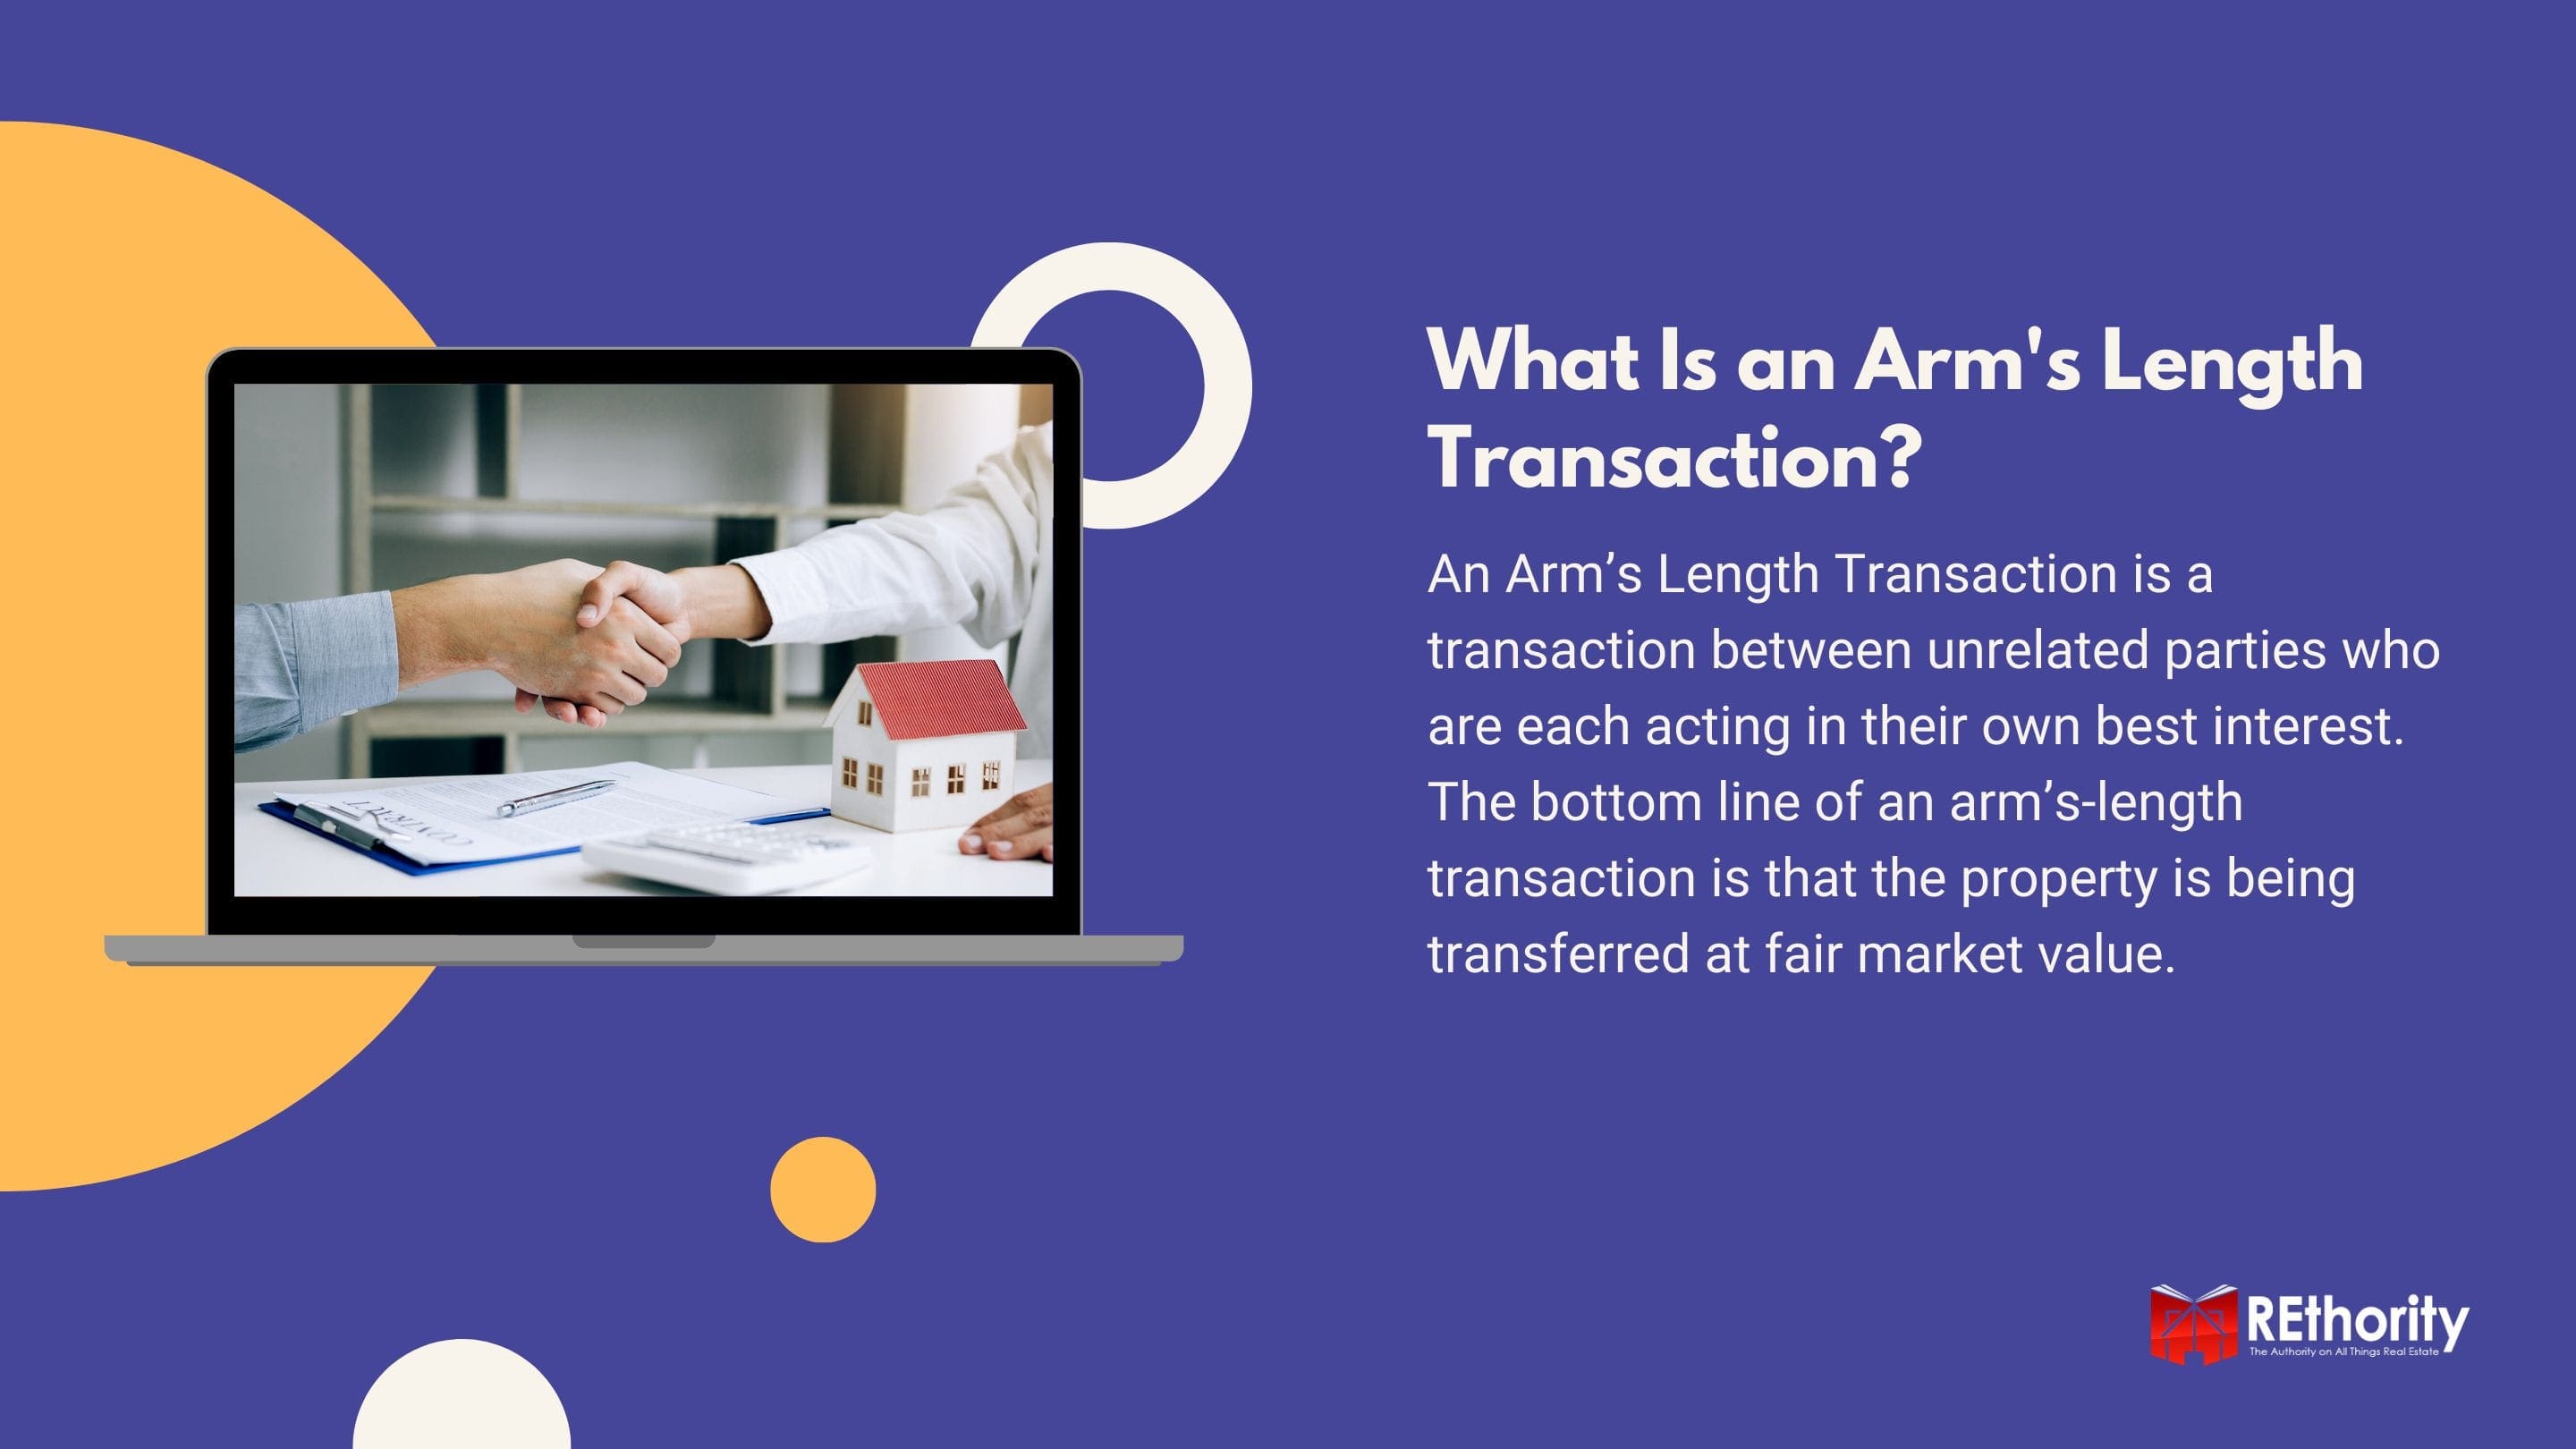 What Is an Arm's Length Transaction?